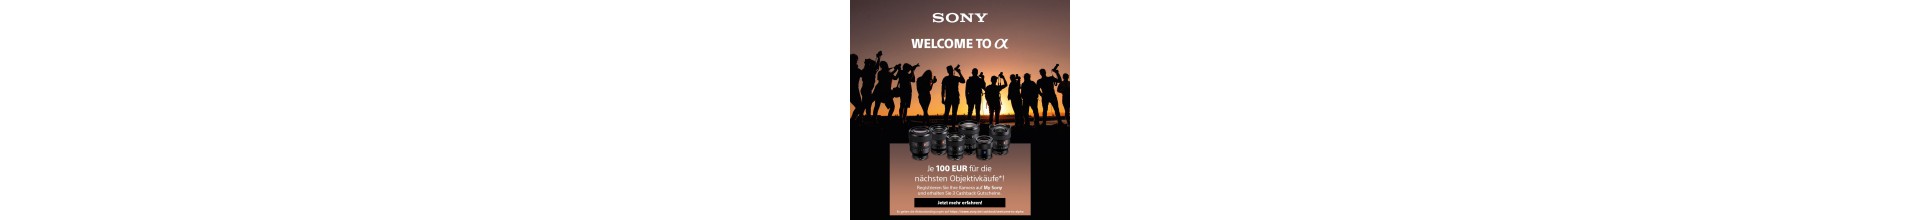 Sony - Welcome to Alpha